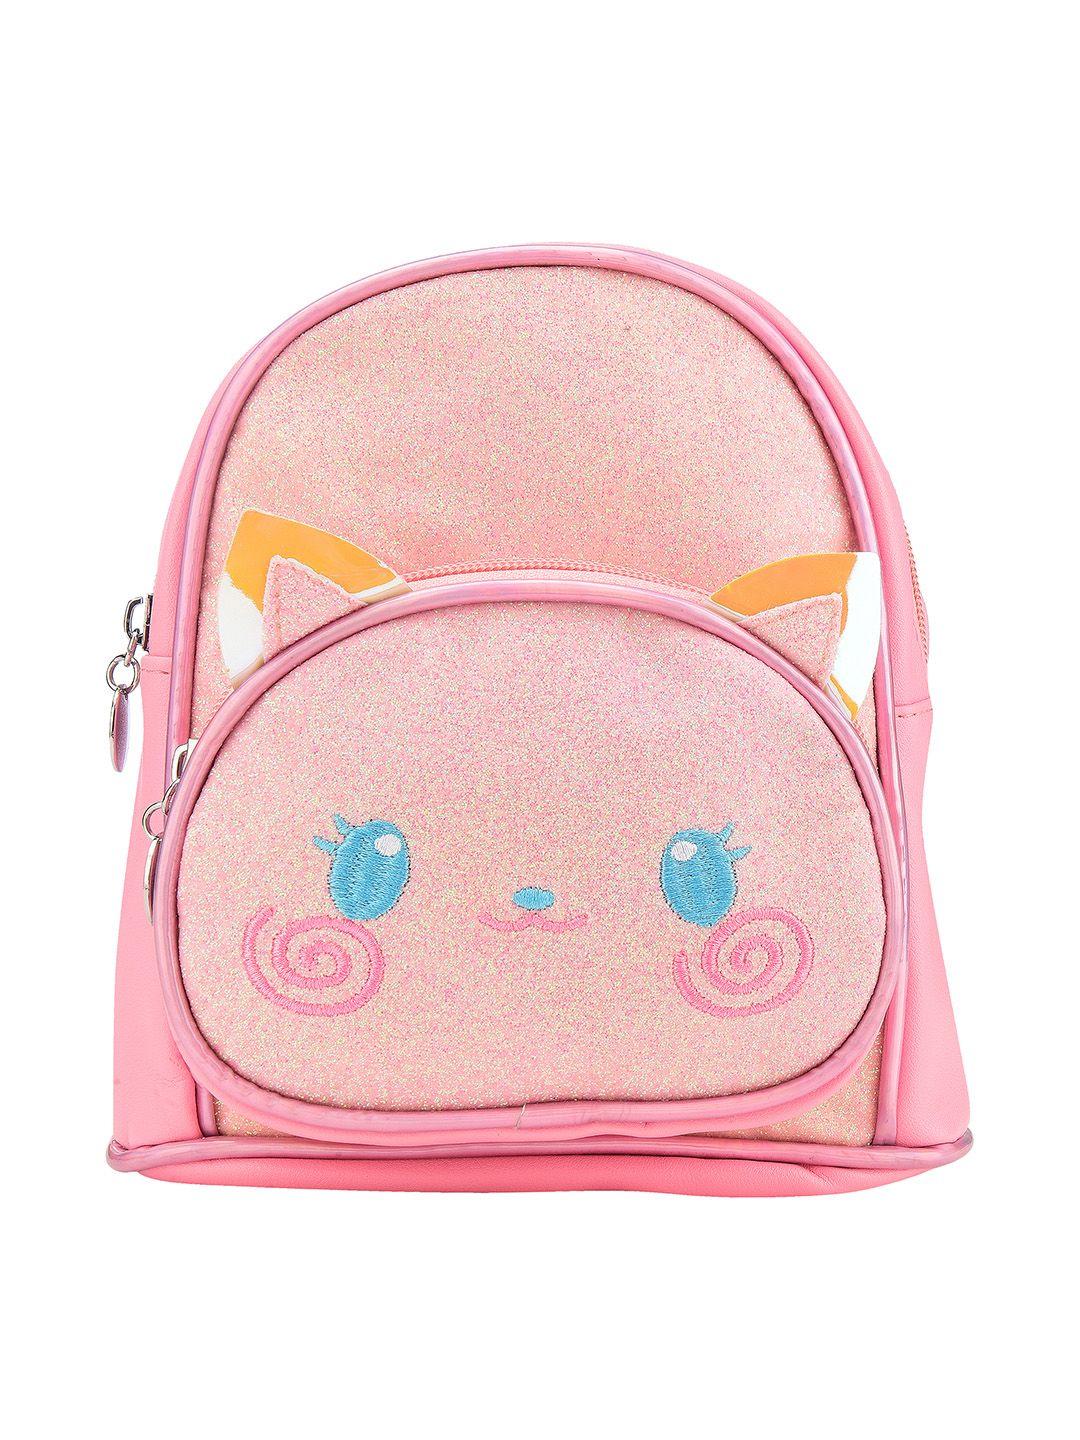 kids on board kids pink glitter cat face 7 inches picnic backpack